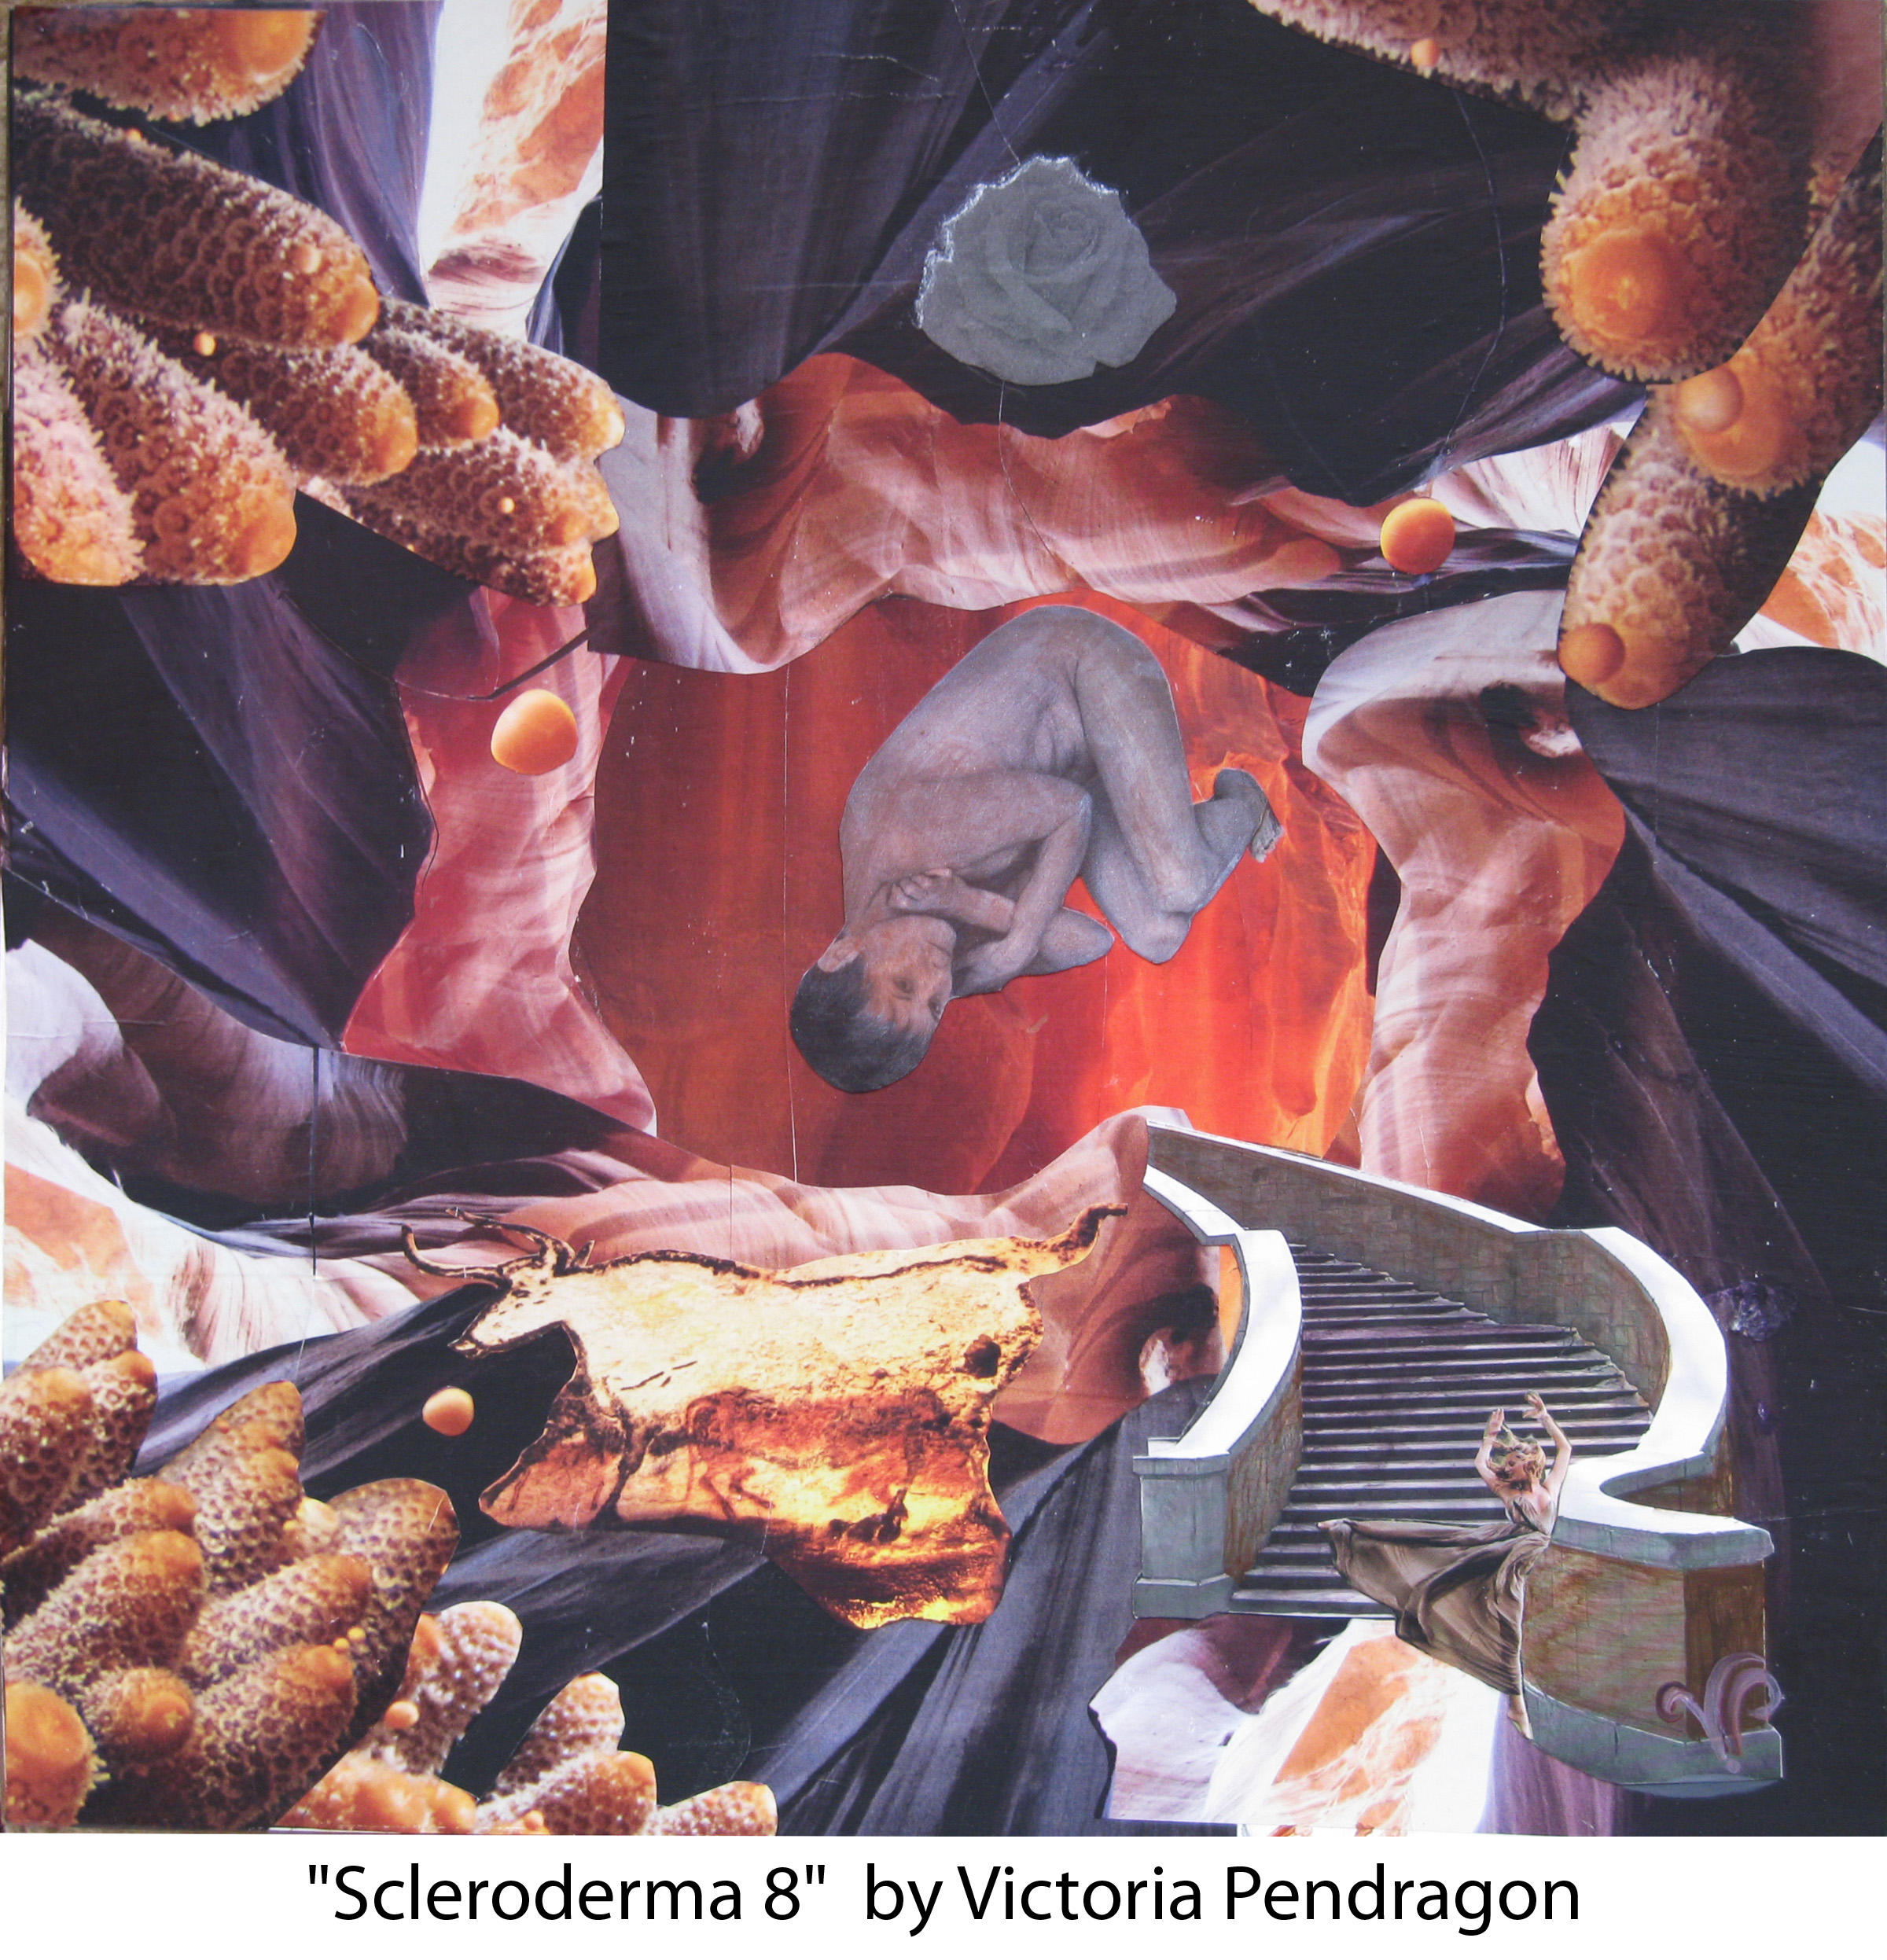 Scleroderma 8 by Victoria Pendragon